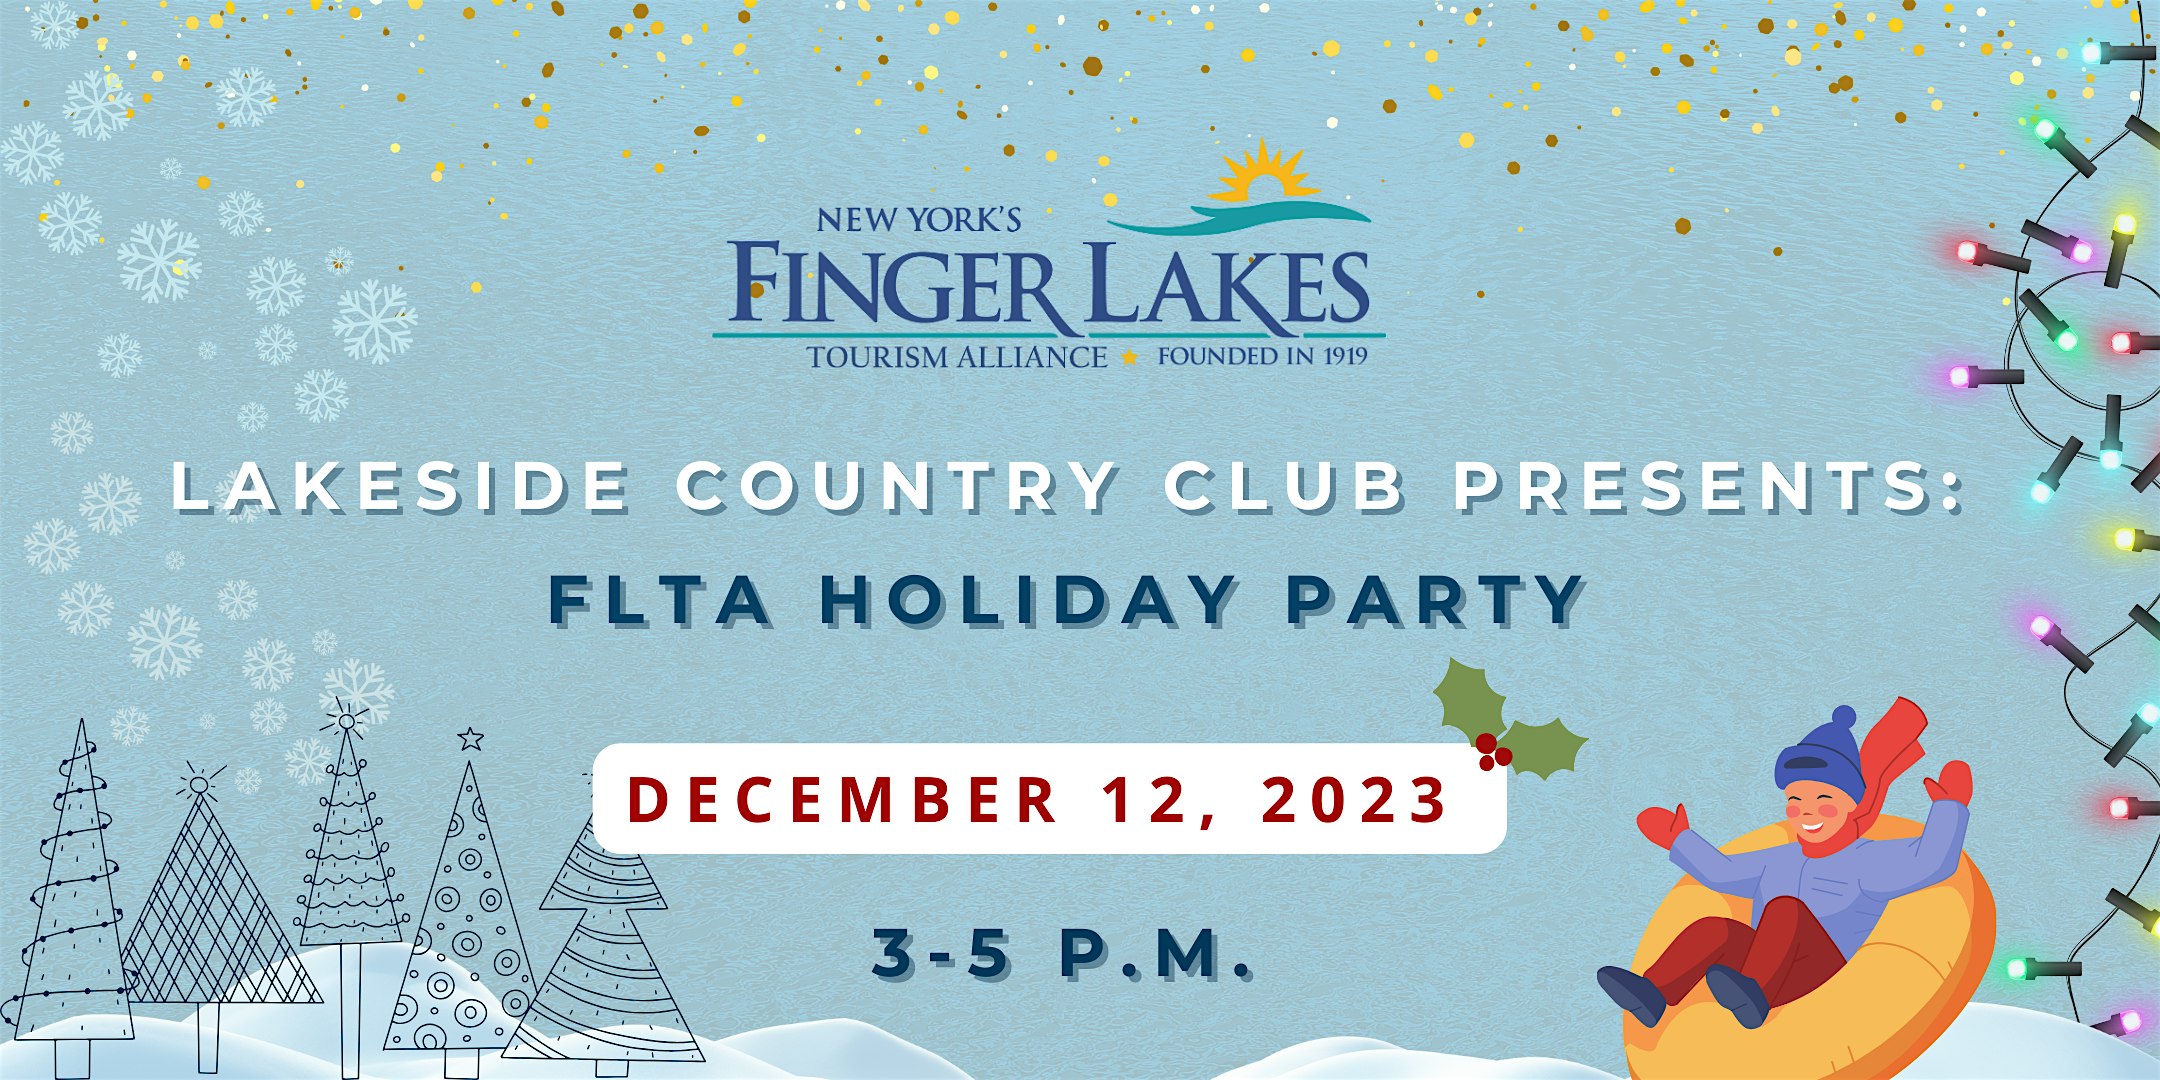 2023 FLTA Holiday Party